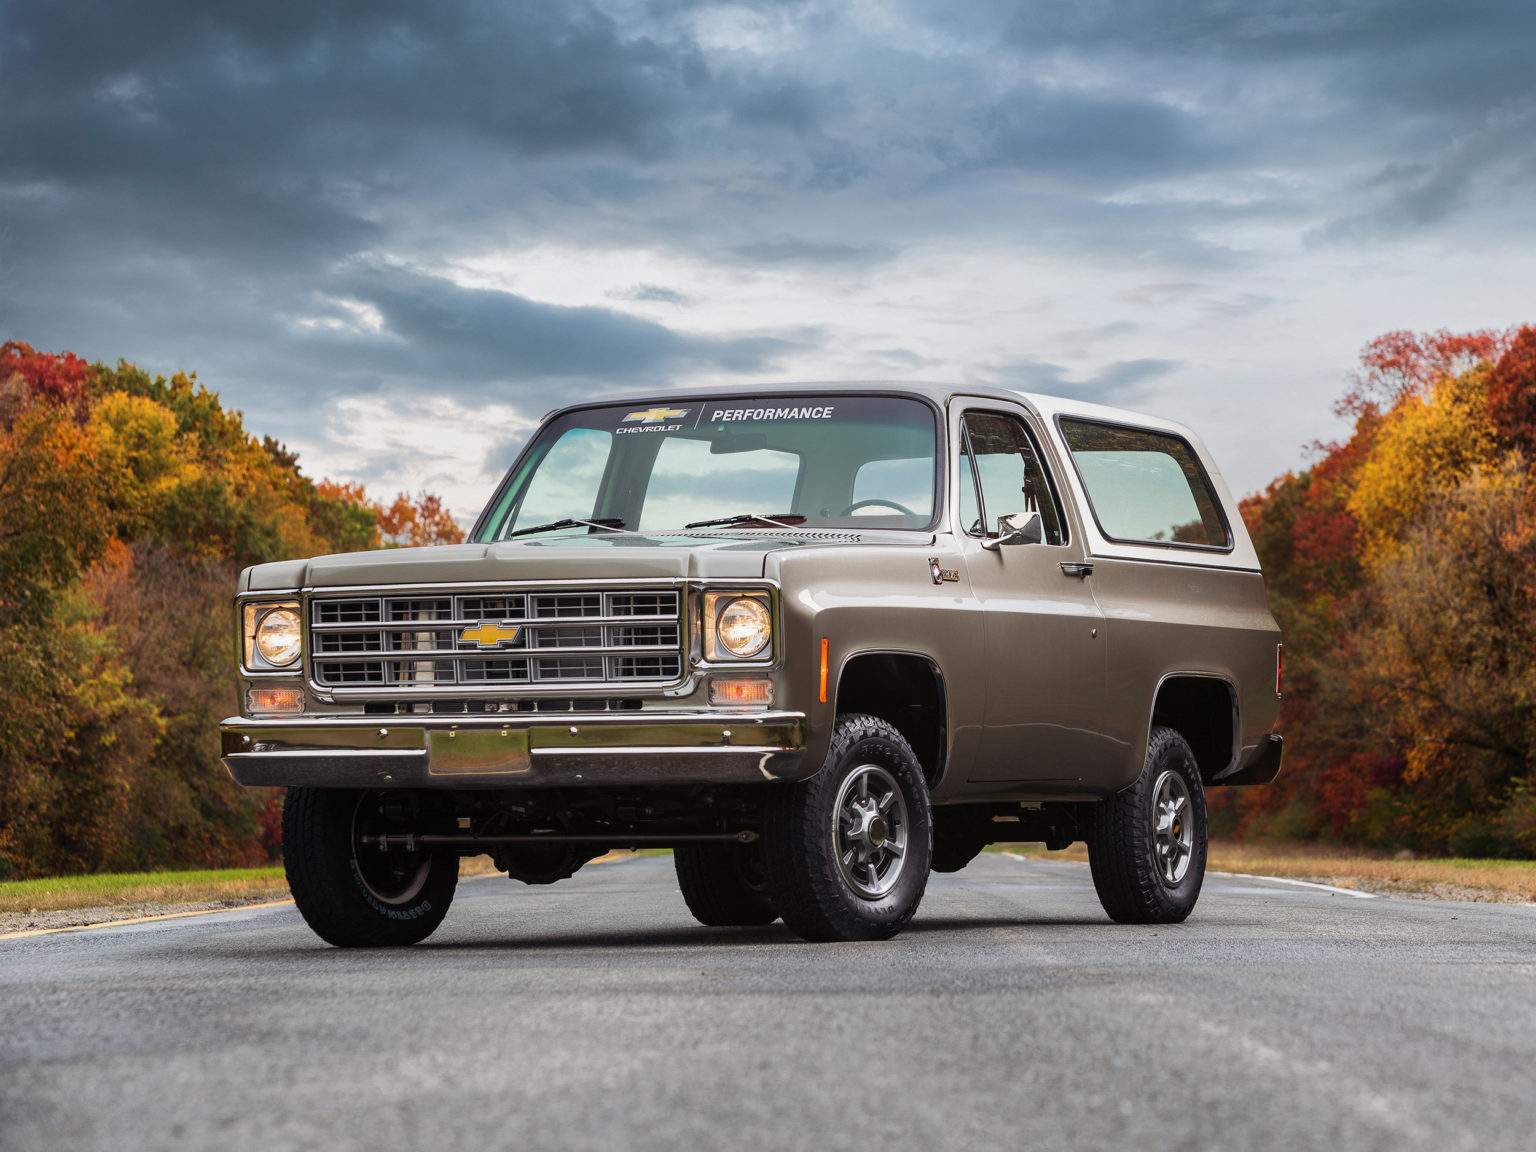 This 1977 Chevrolet K5 Blazer has been given an all-electric powertrain.